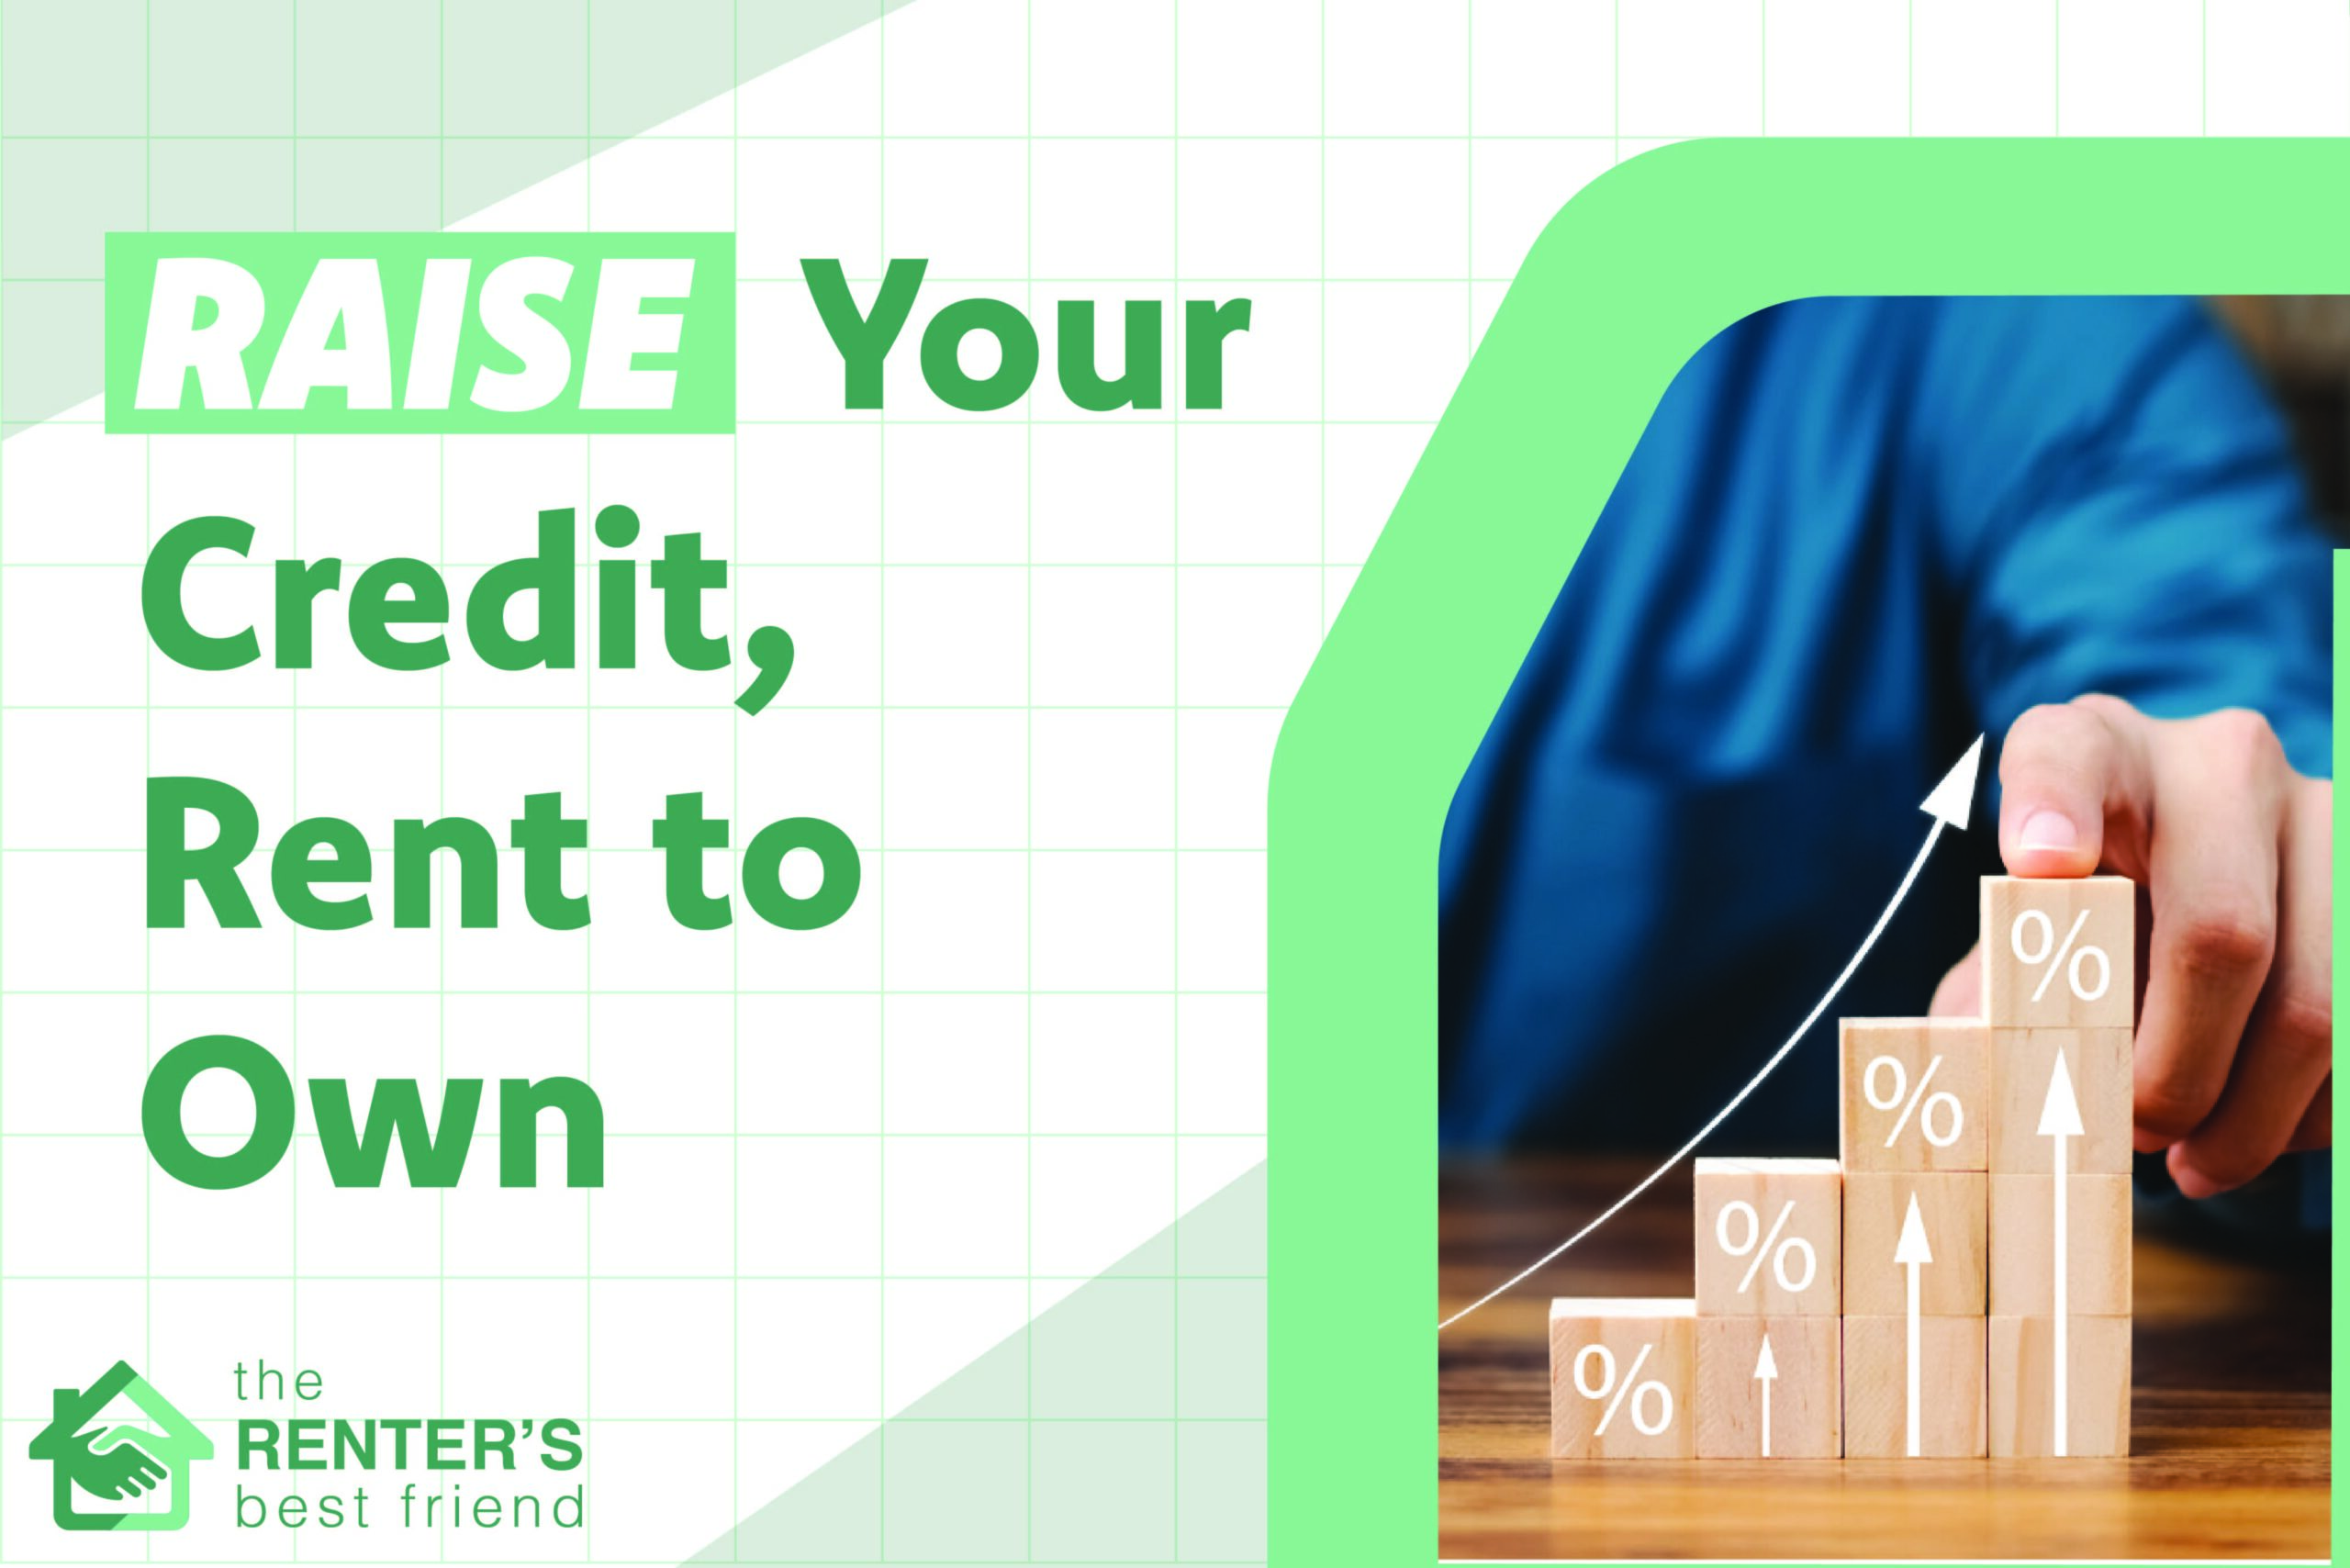 Do rent to own payments help build my credit?